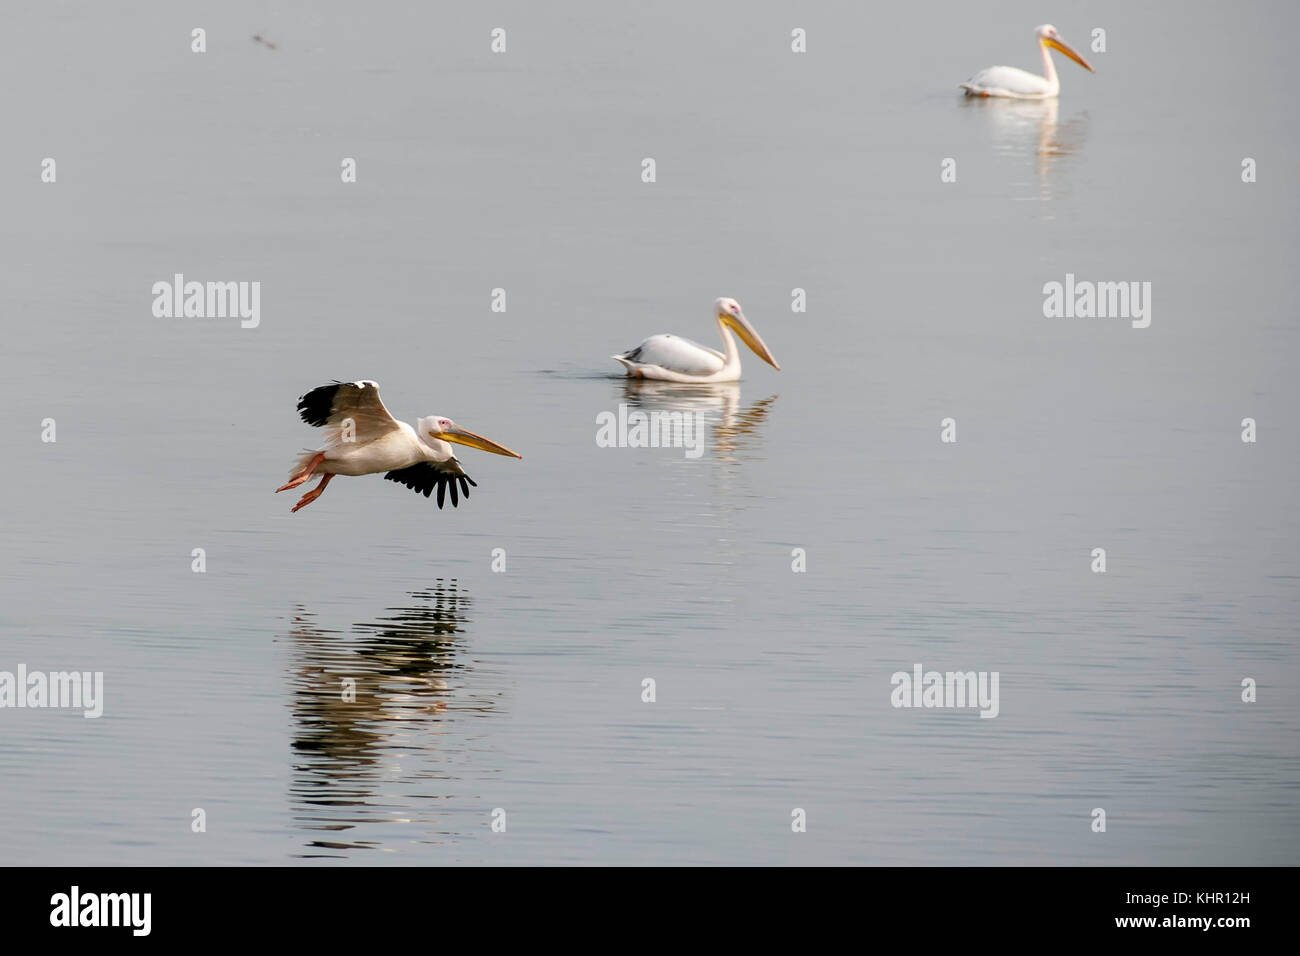 the pelican is watered. migration time Stock Photo